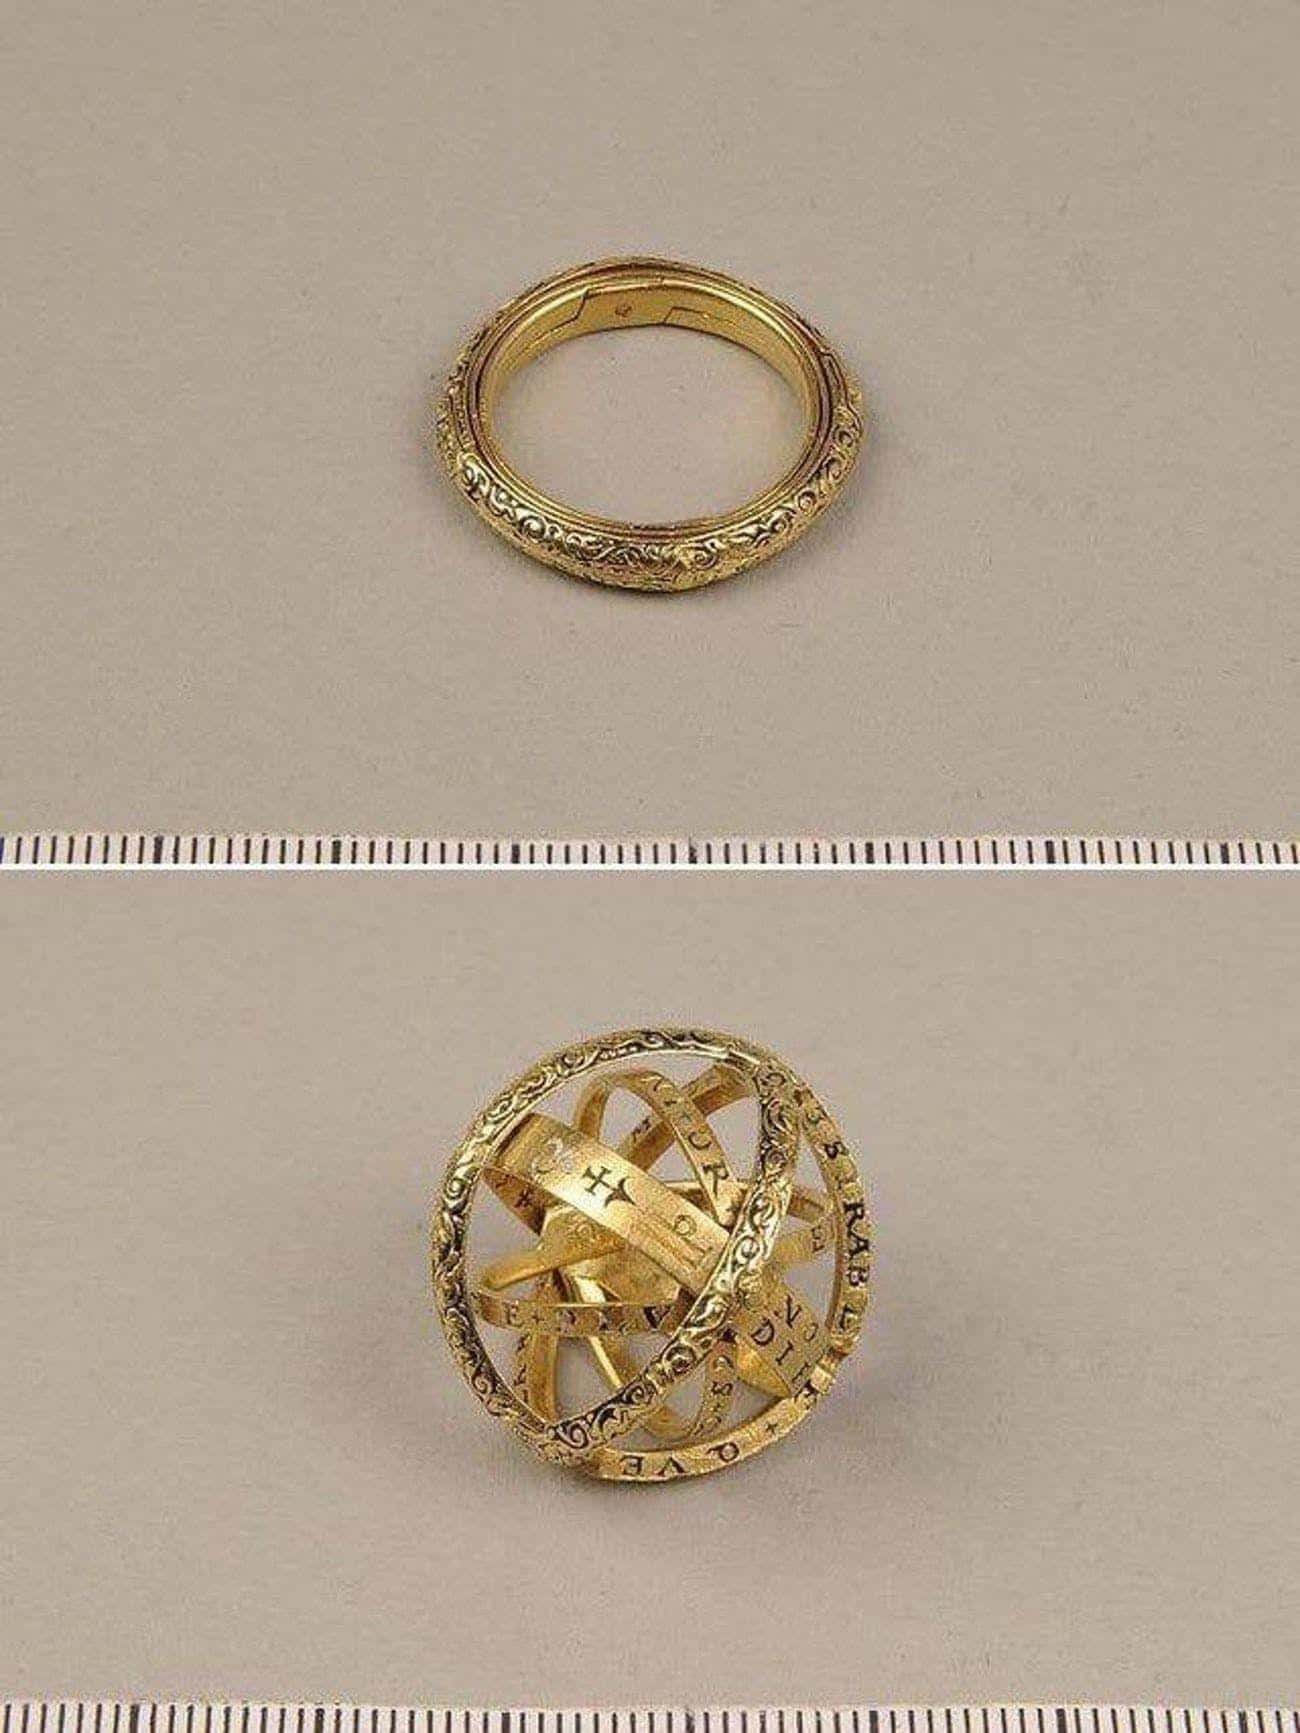 16th-Century Ring That Unfolds Into An Astrological Sphere